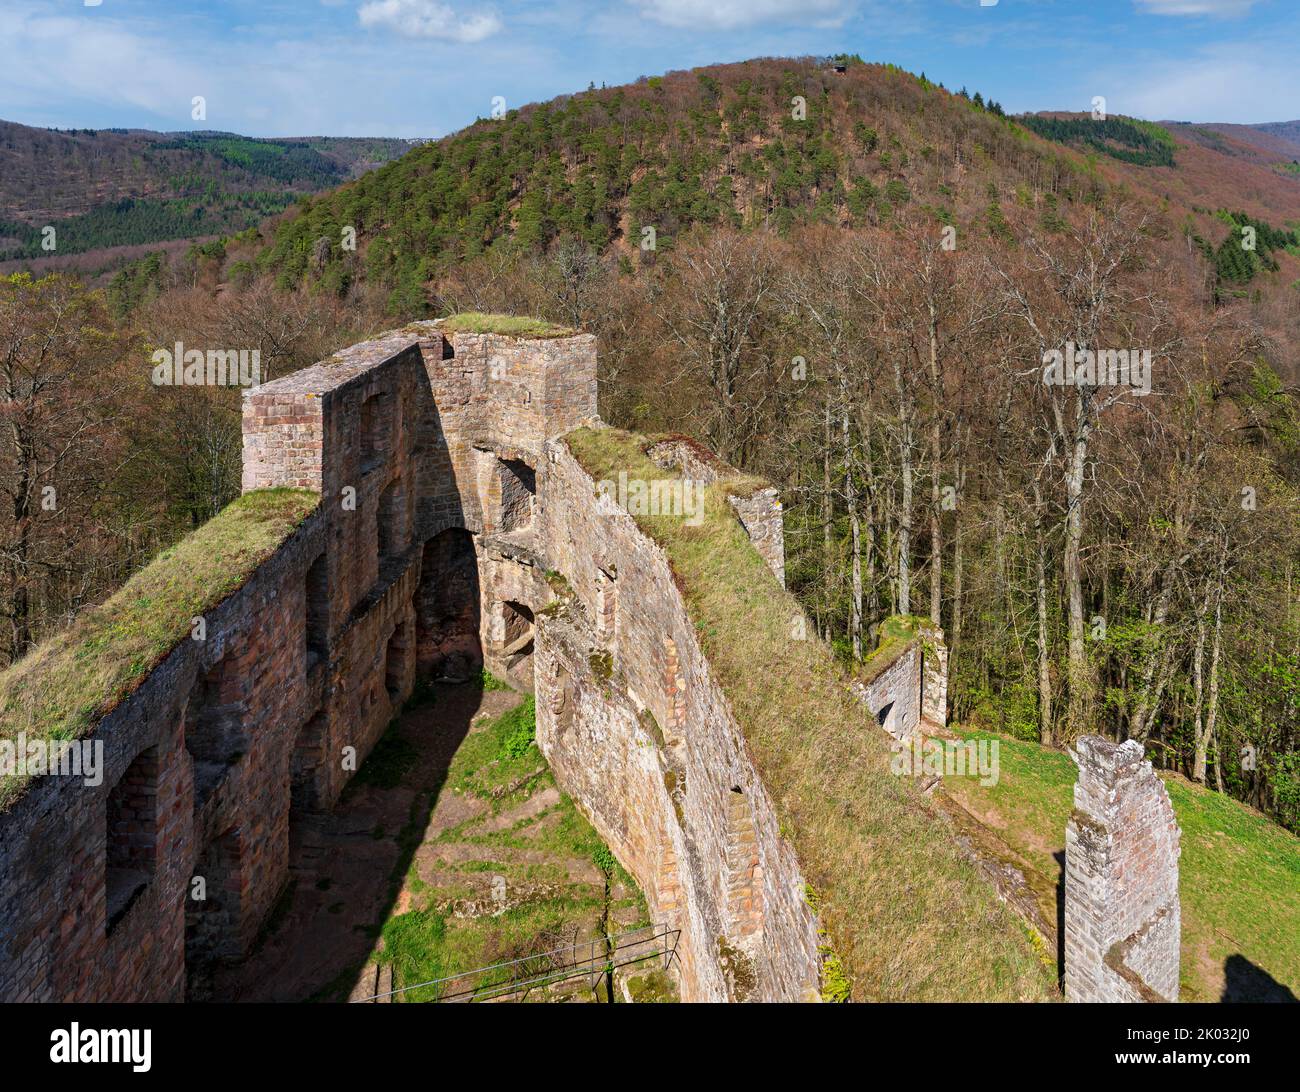 Gräfenstein Castle is the ruin of a rock castle on the 437 m high Schloßberg near Merzalben in the district of Südwestpfalz. It is one of the most important castle complexes of the Hohenstaufen period in Rhineland-Palatinate. Stock Photo